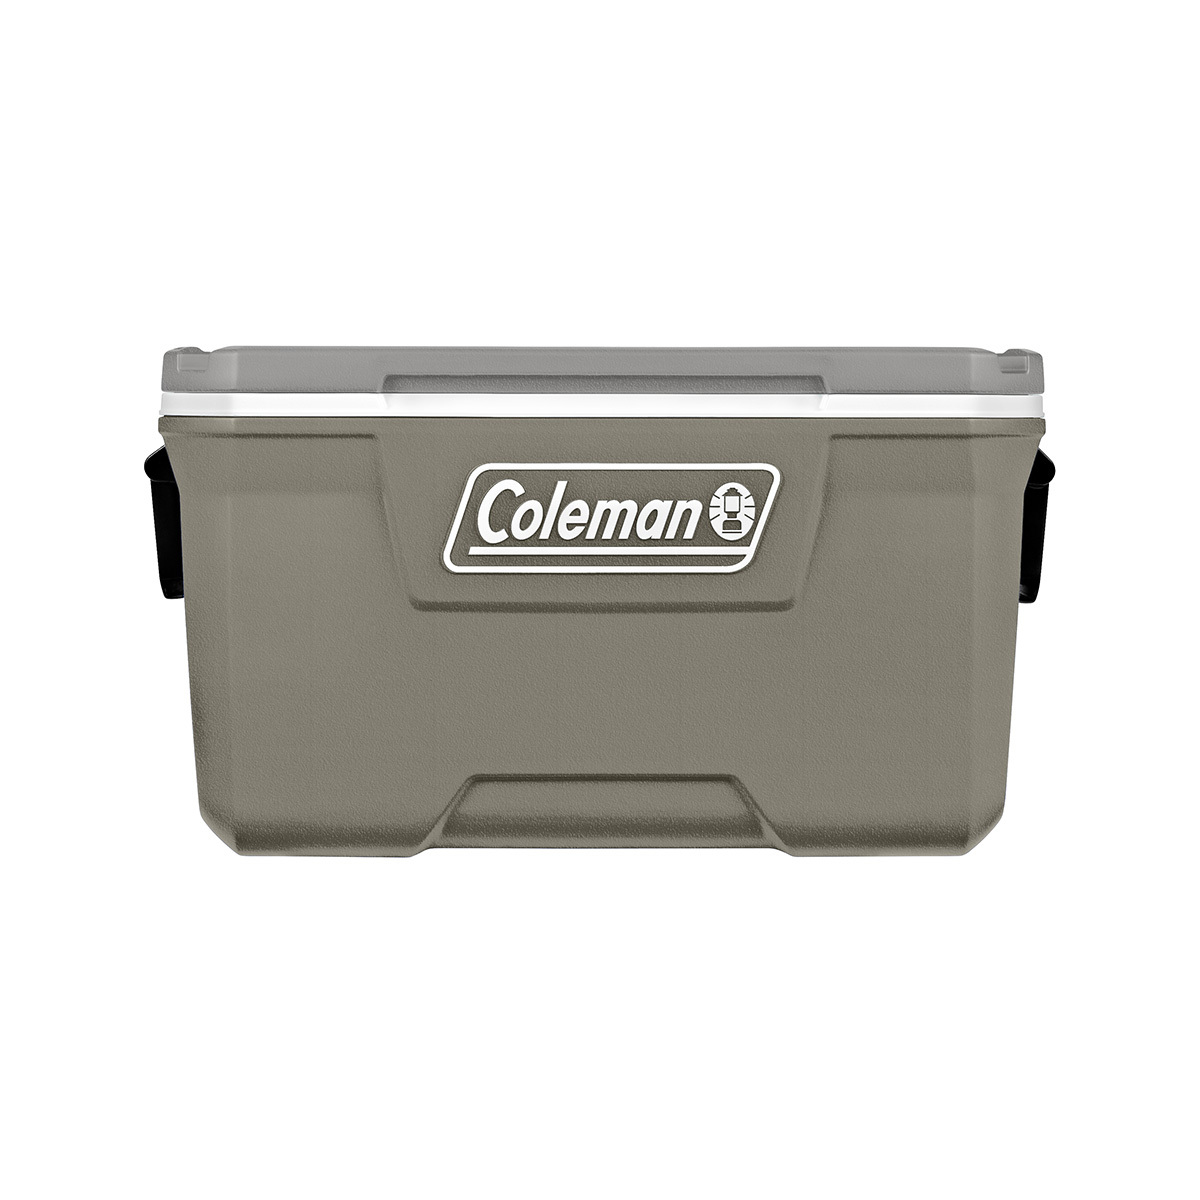 Coleman 316 Series 70QT Hard Chest Cooler, Silver Ash - image 1 of 11